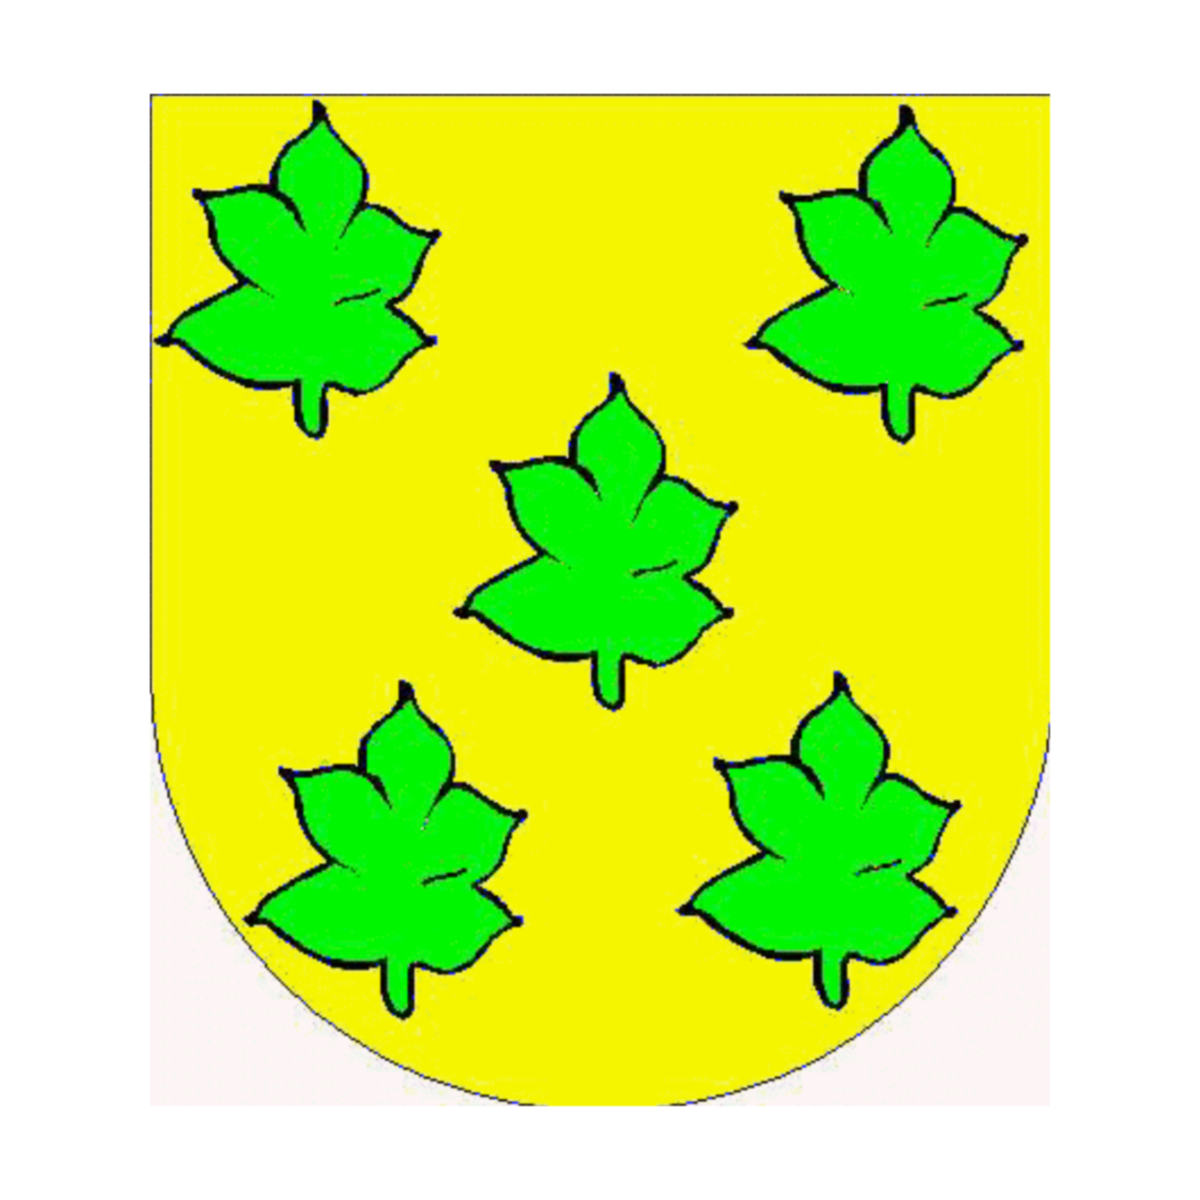 Coat of arms of familyFigueira